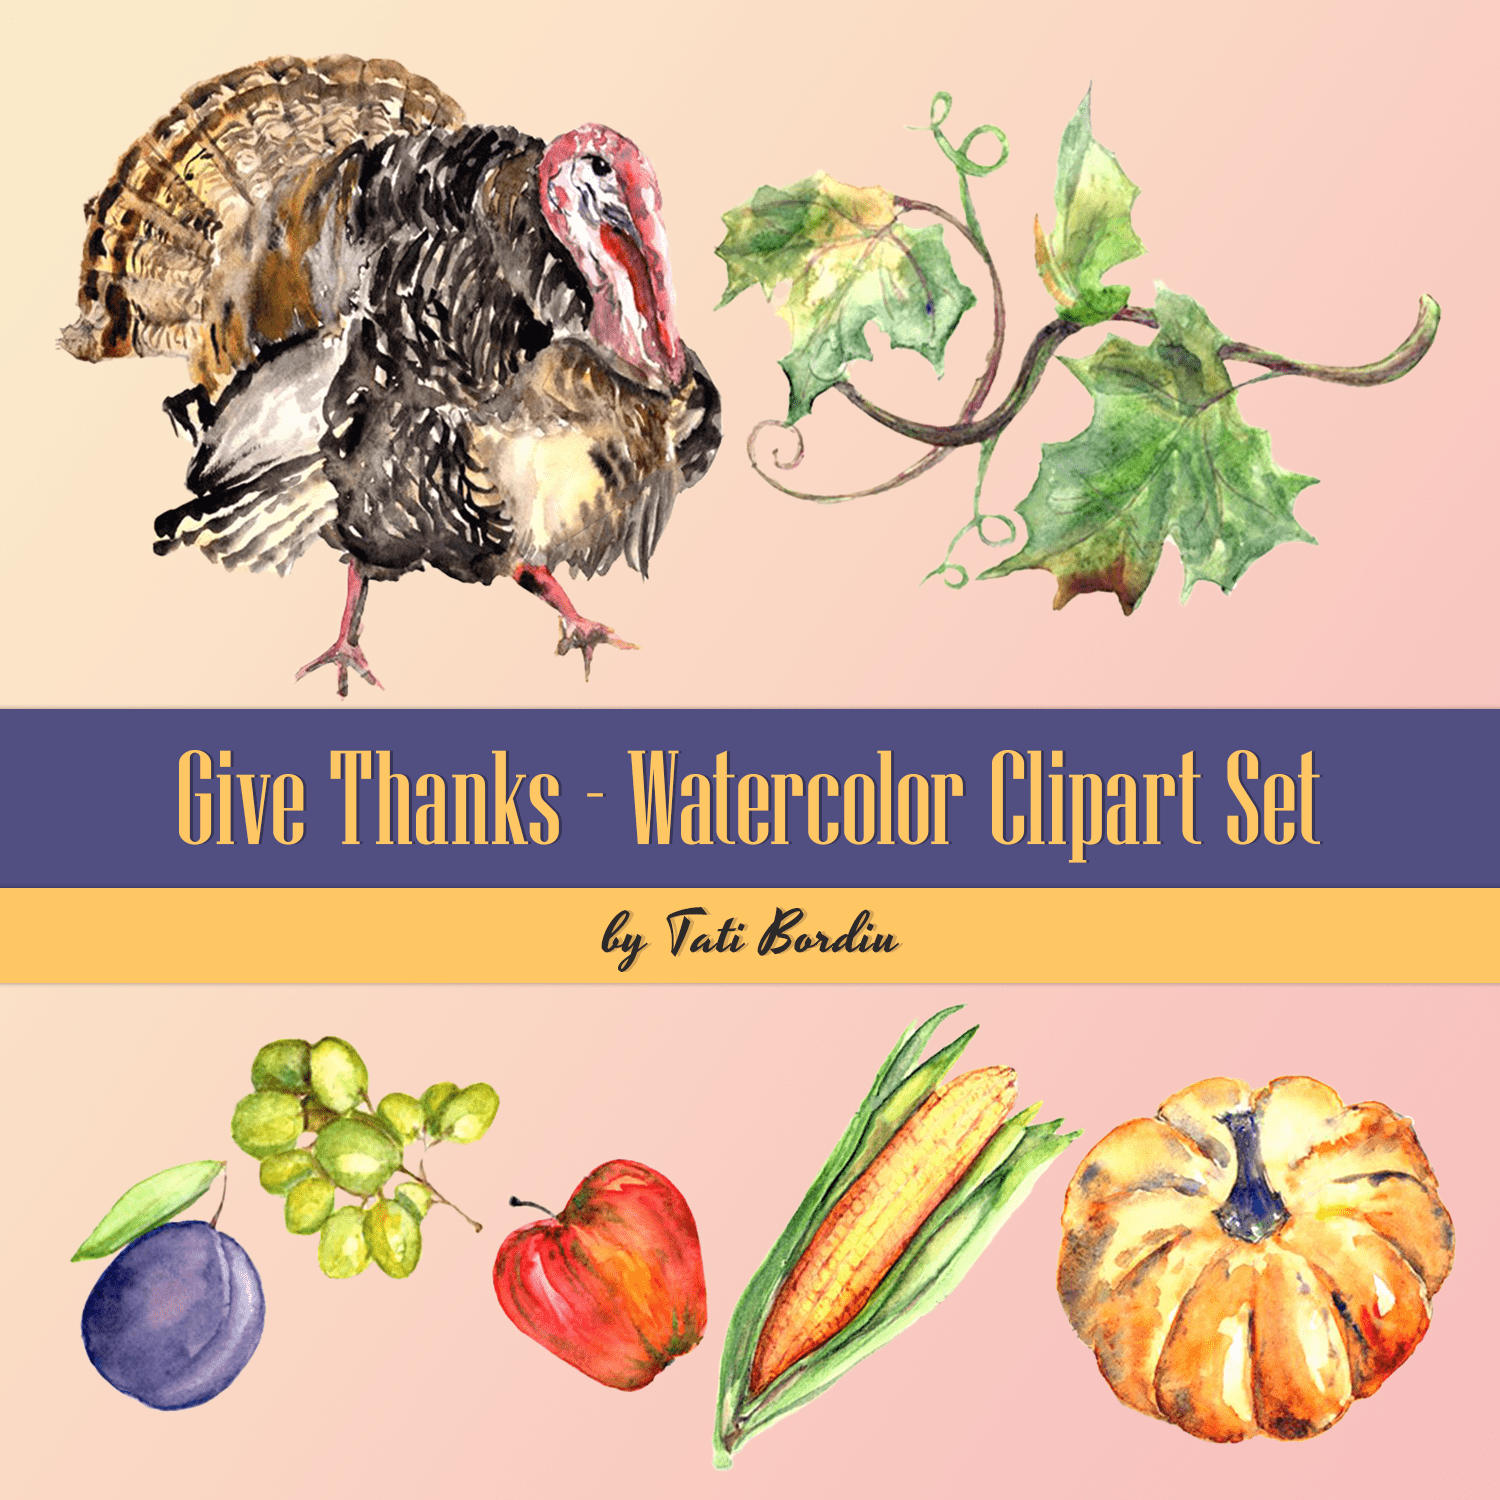 Give Thanks - Watercolor Clipart Set.